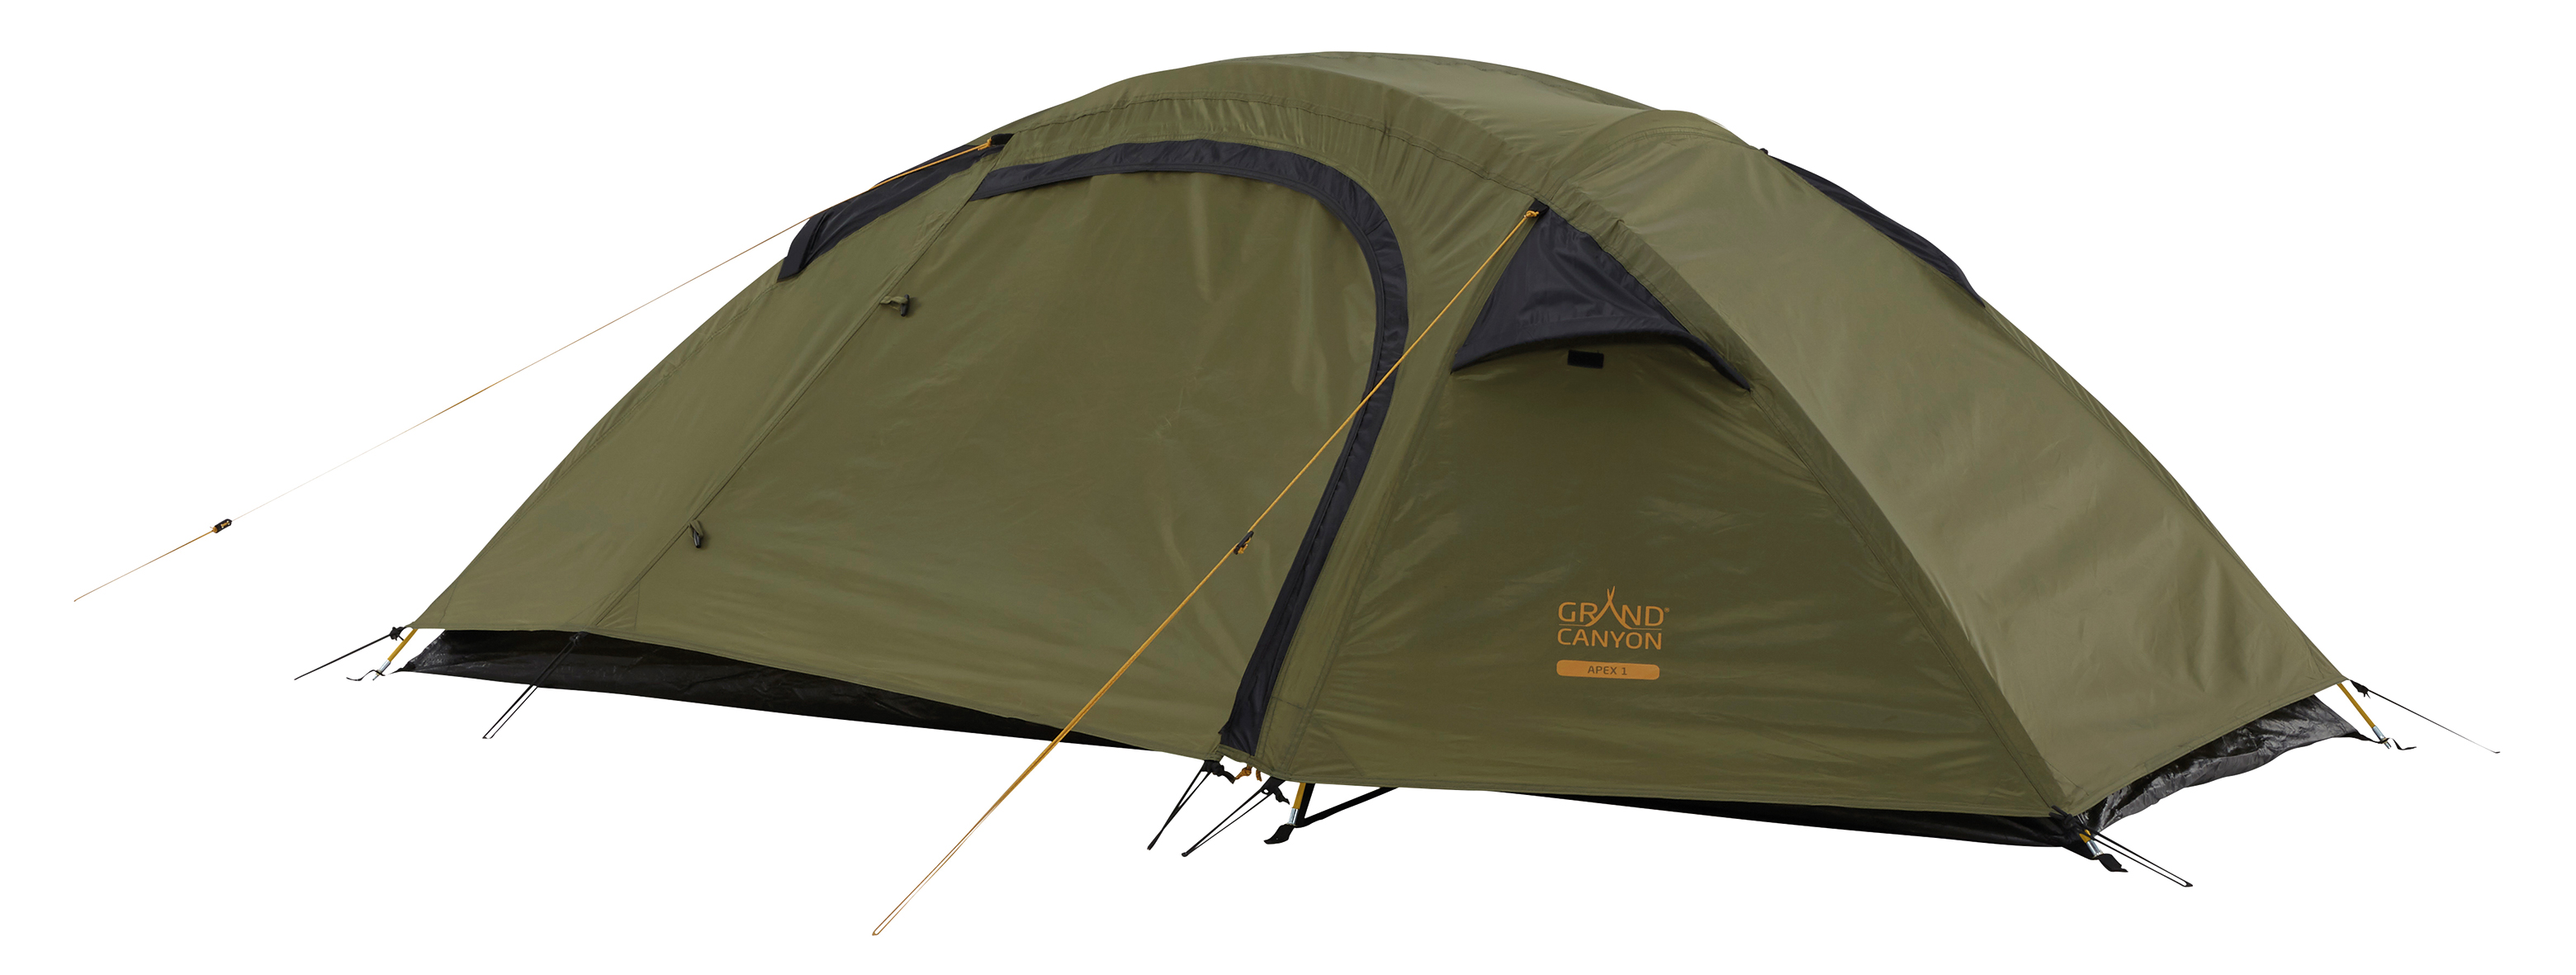 Grand Canyon Apex 1 Geodesic Dome Tent